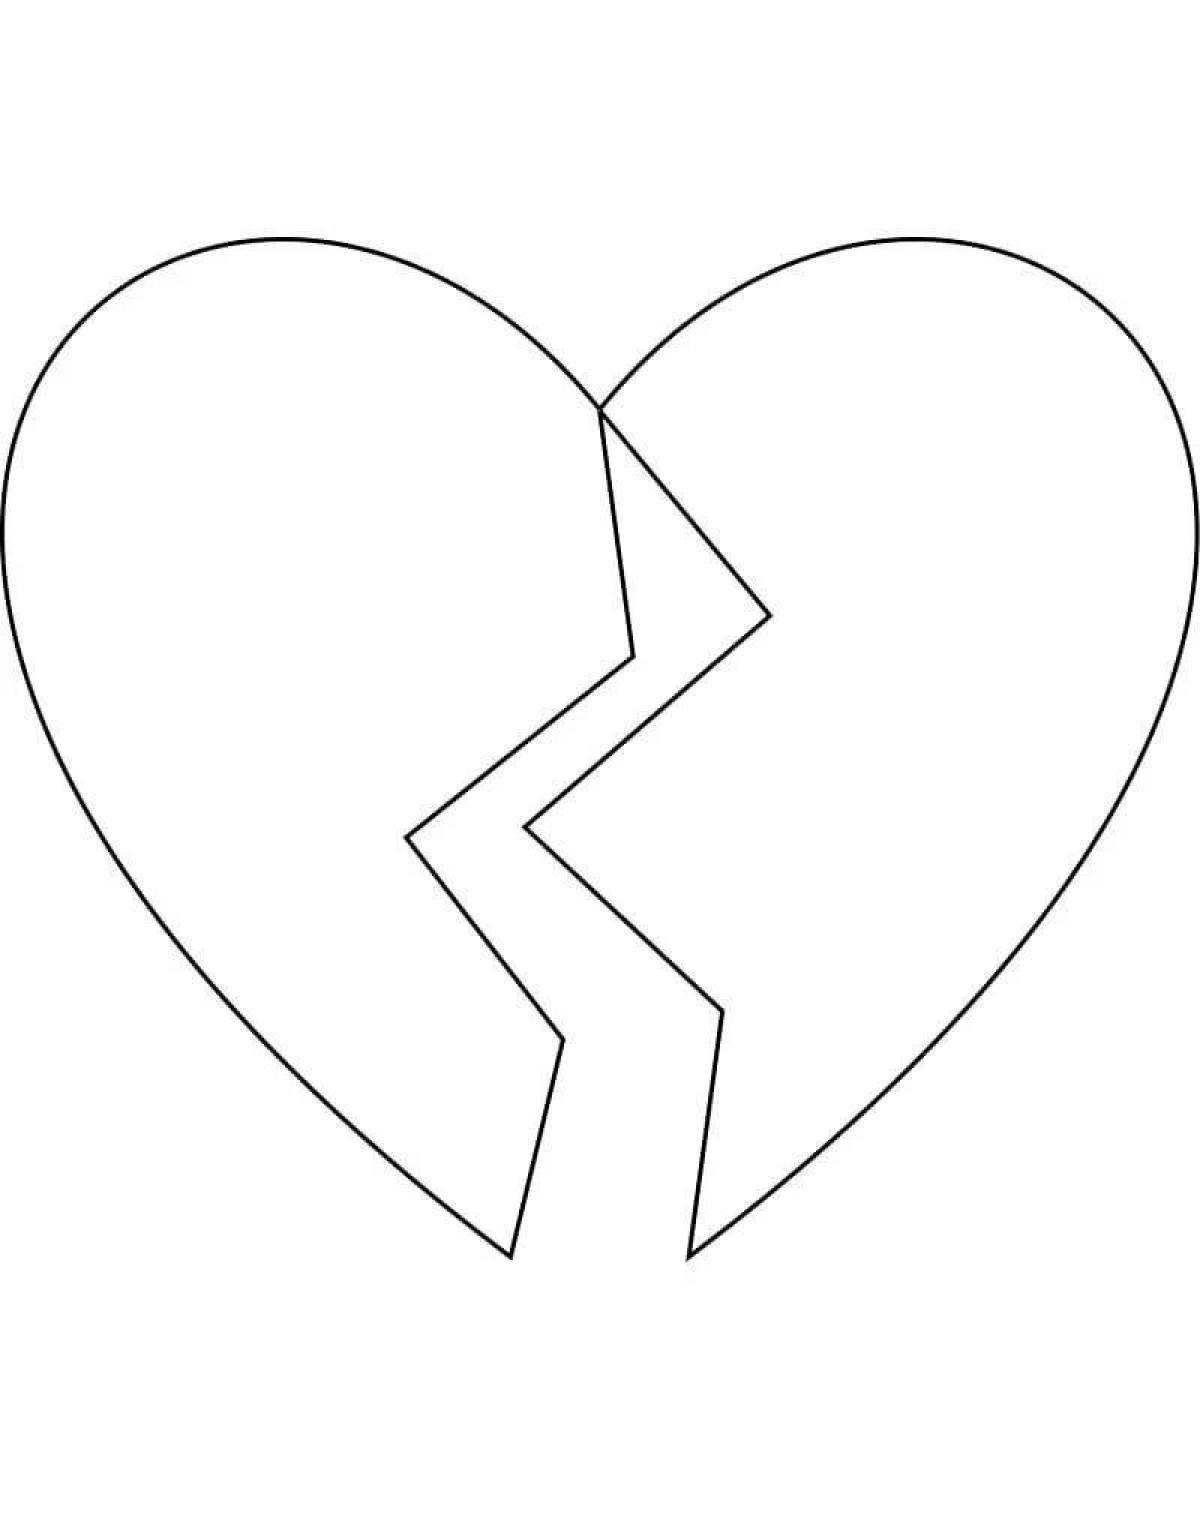 Cute heart coloring page